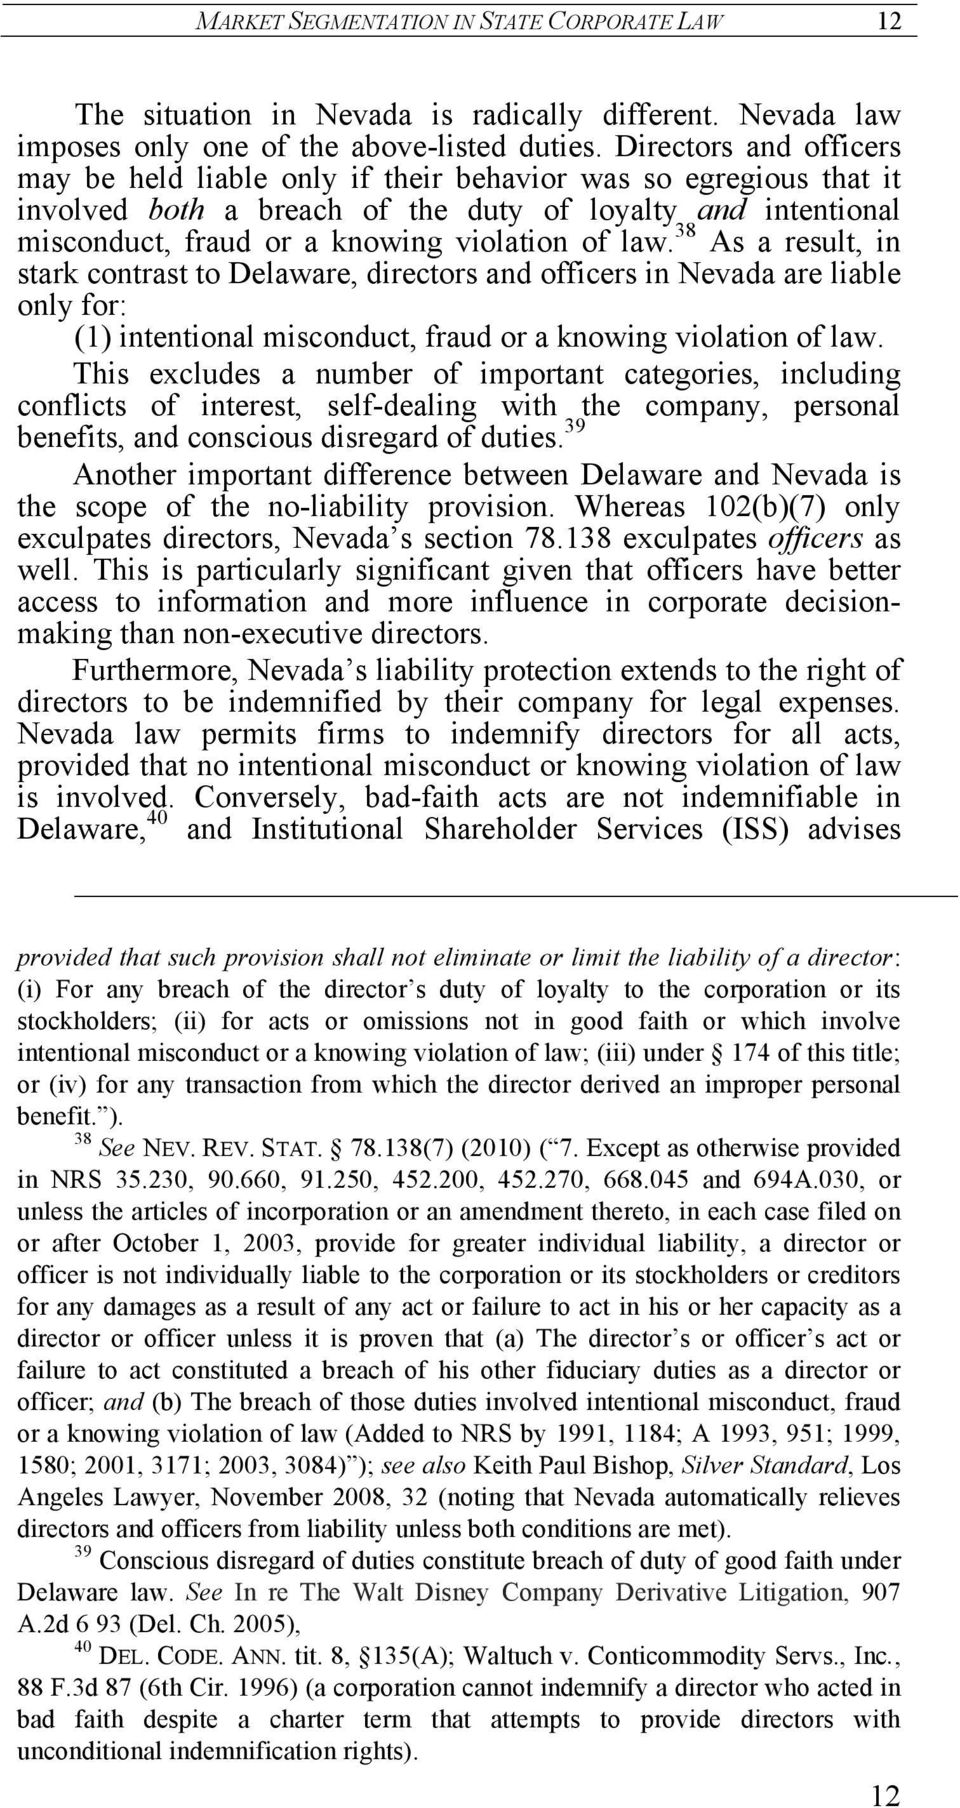 38 As a result, in stark contrast to Delaware, directors and officers in Nevada are liable only for: (1) intentional misconduct, fraud or a knowing violation of law.